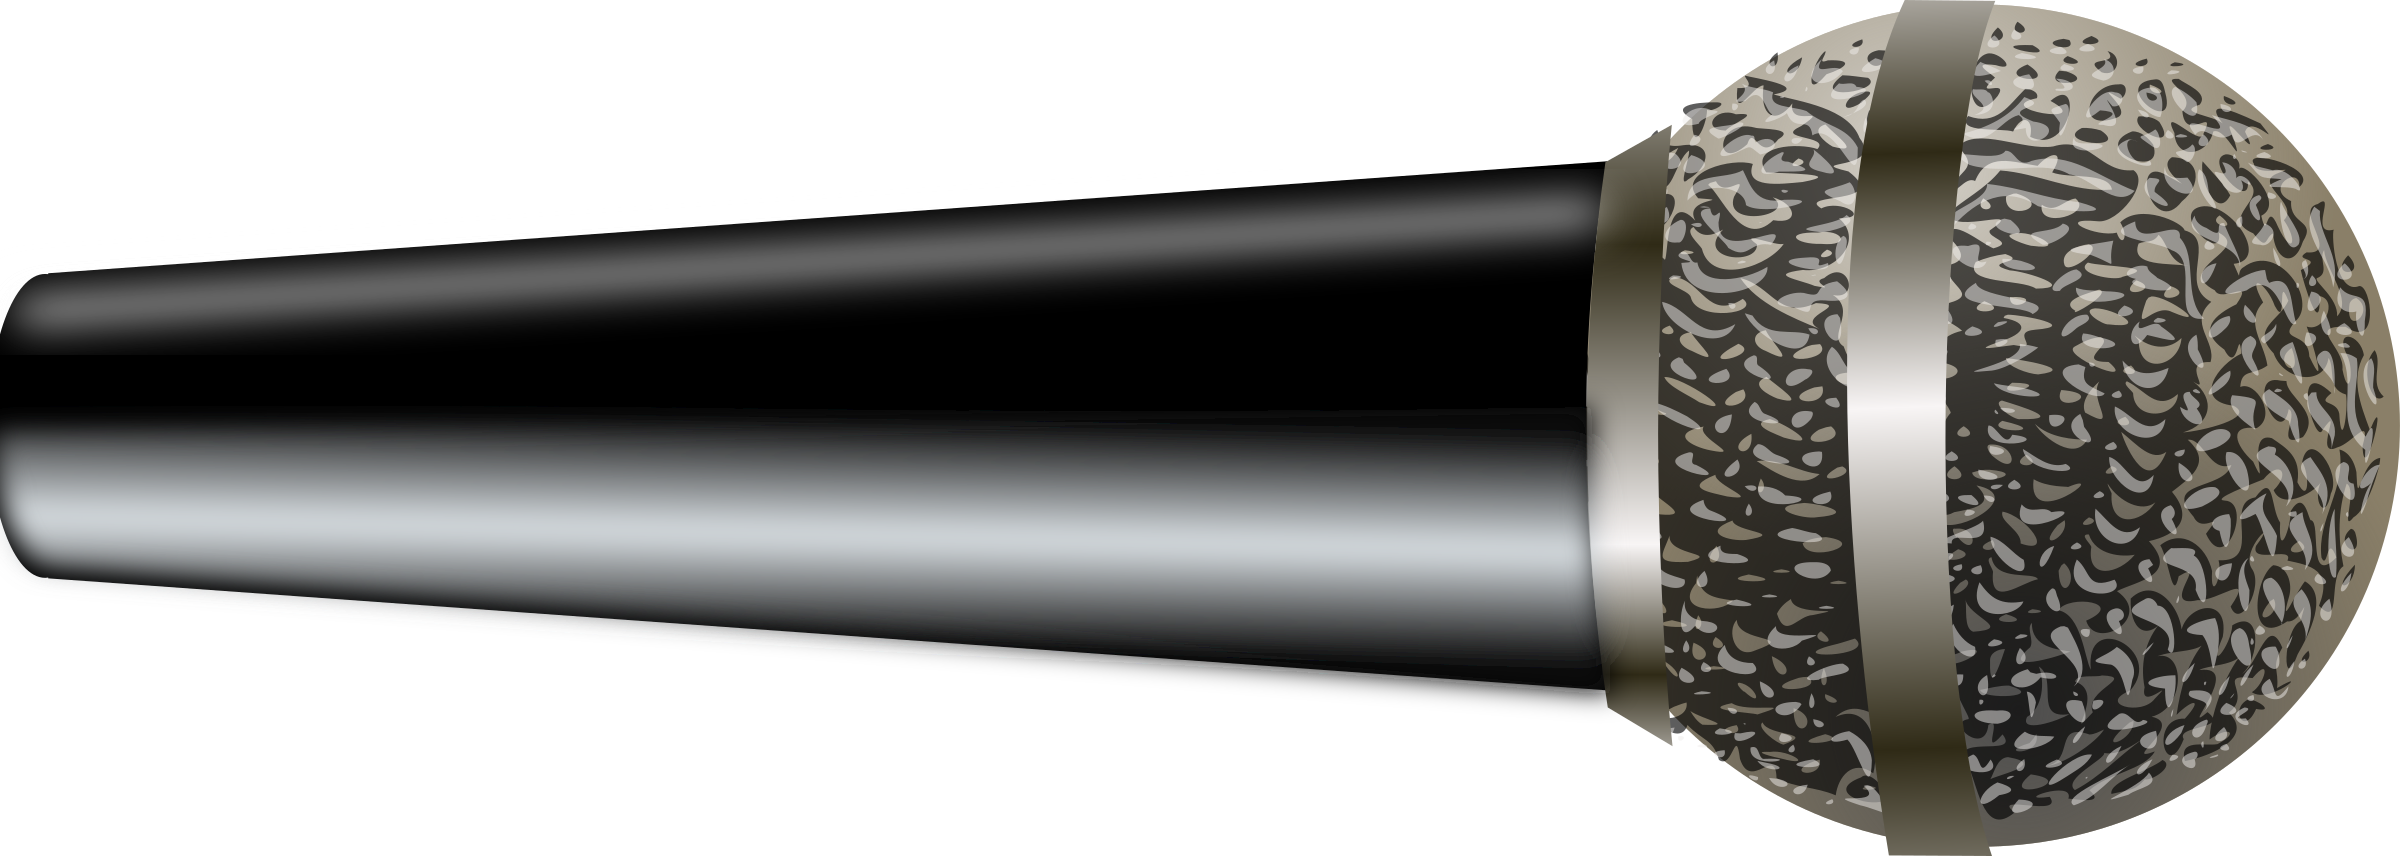 Microphone Transparent PNG Image